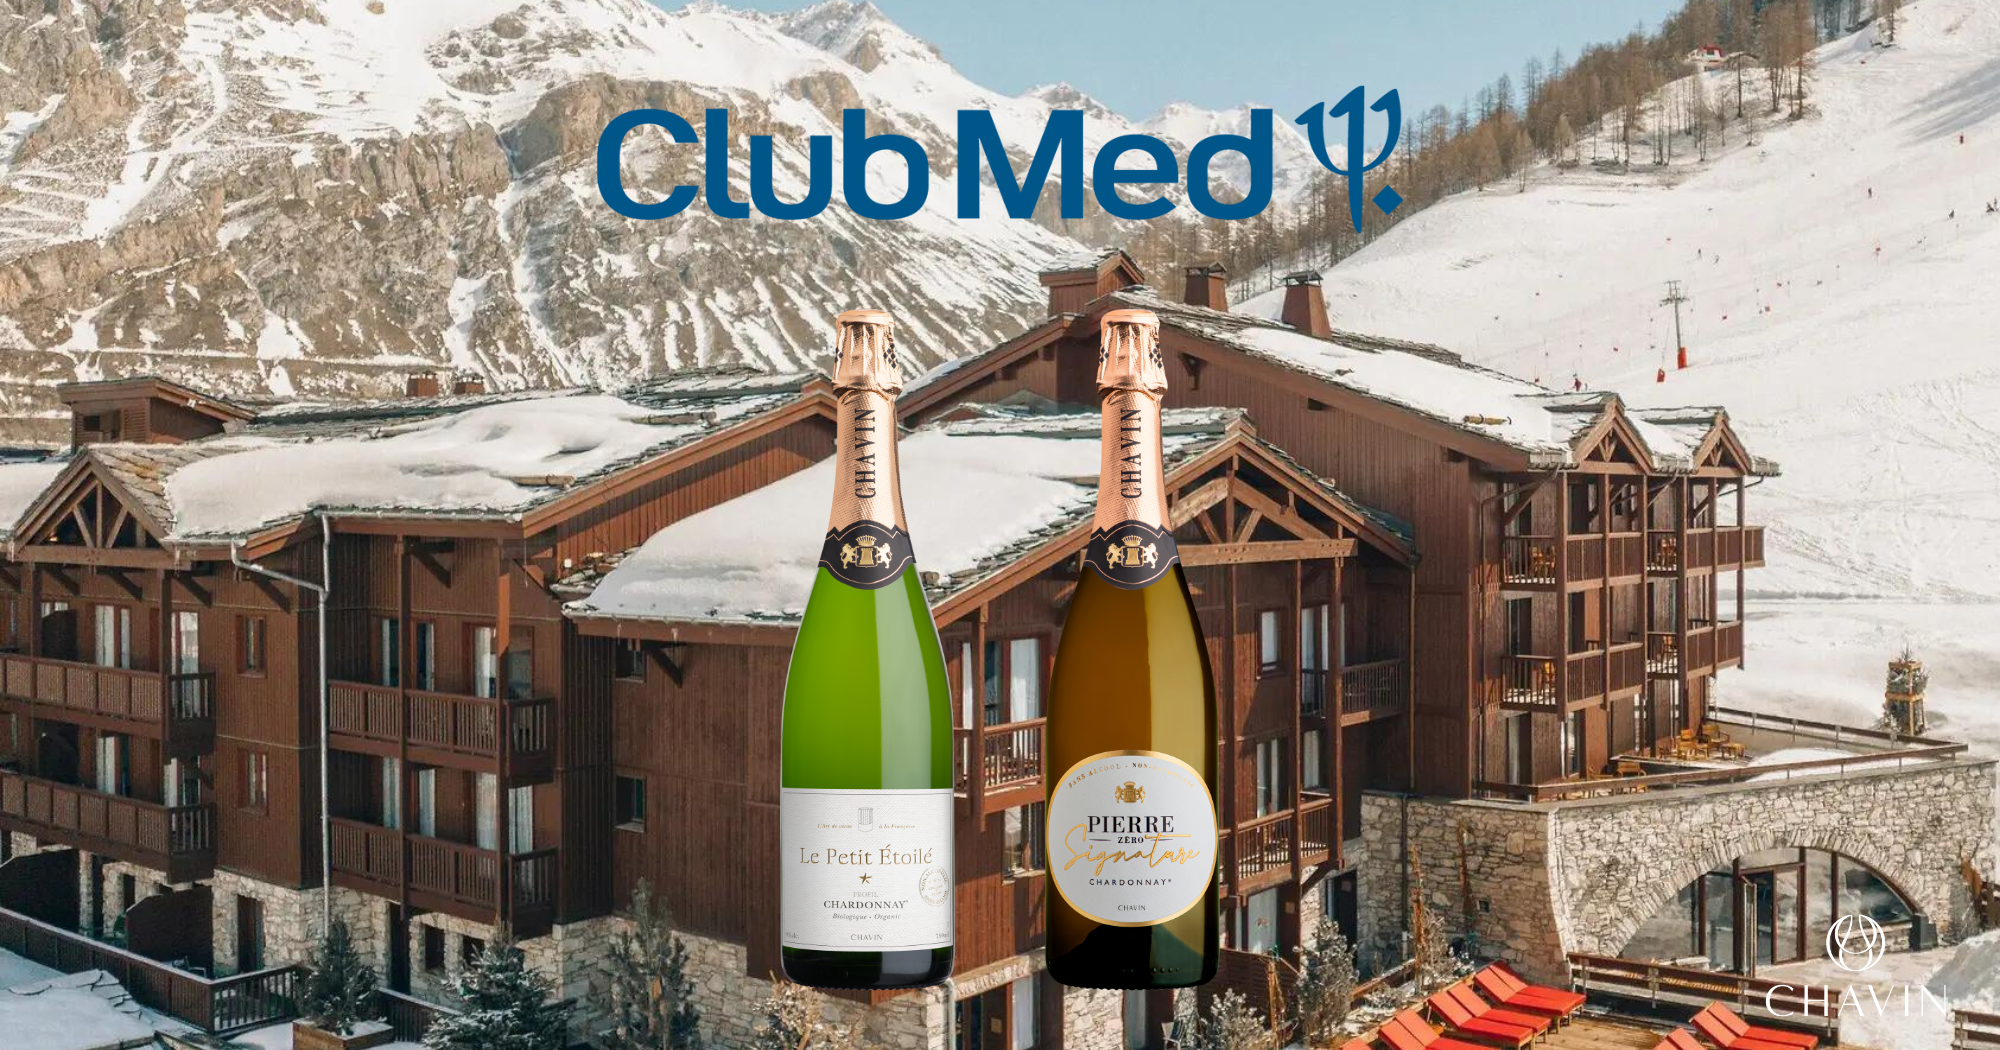 Chavin - Le Petit Etoilé and Pierre Zéro listed with Club Med